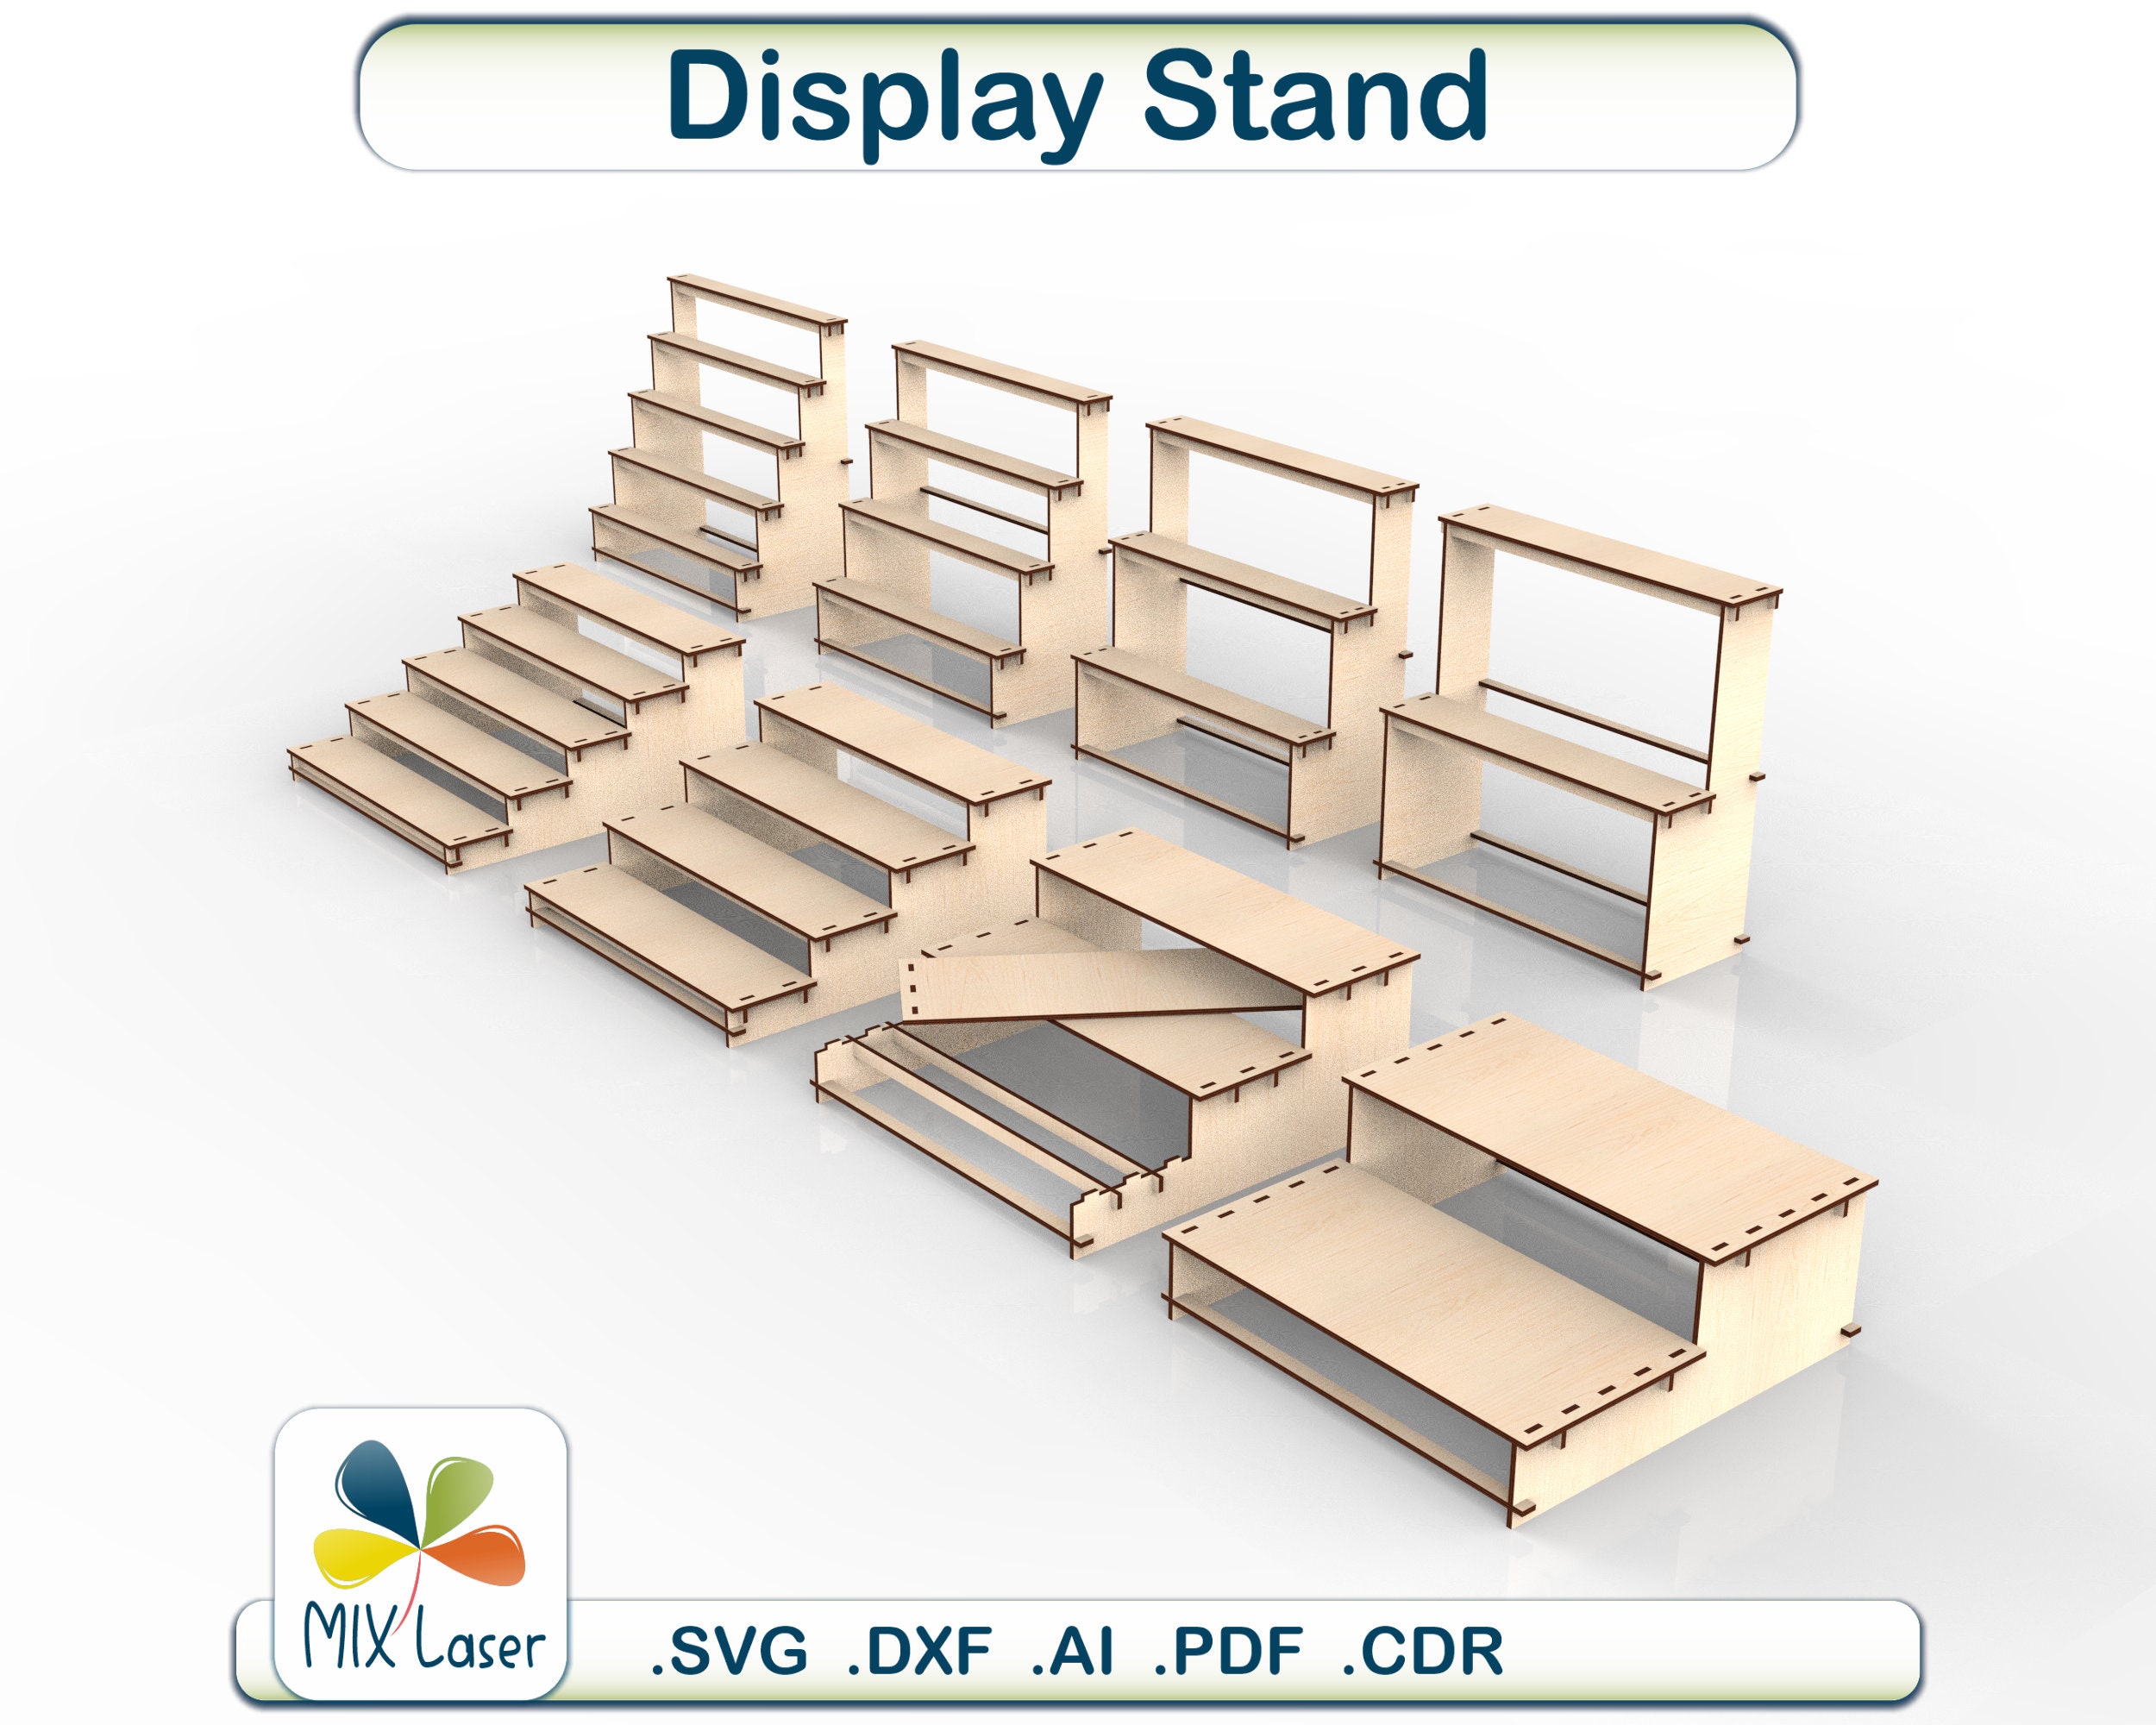 Display Stand, Keychains and Ornaments Market display, Laser Cut Display,  Trade Show Display, Ornament Display, Keychain Display, X Display